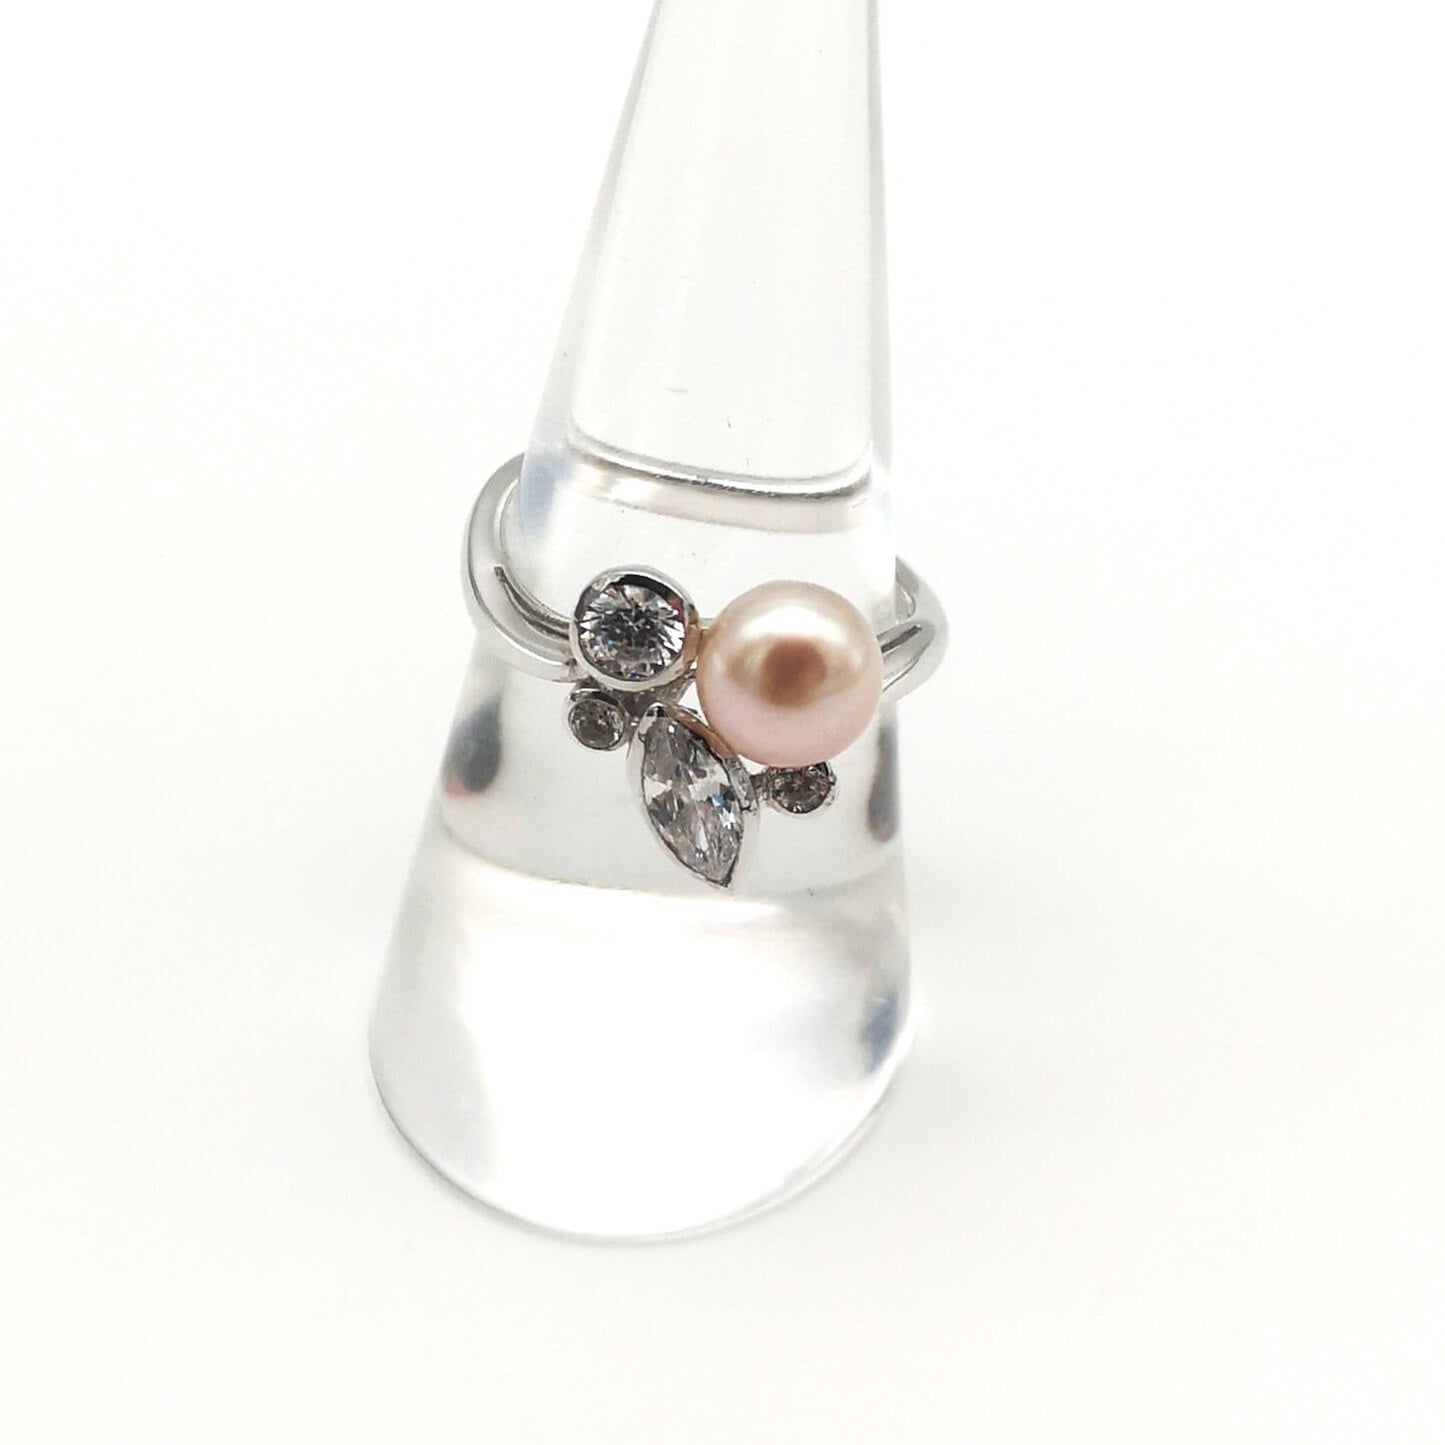 Sterling Silver Peach Freshwater Pearl & CZ Ring